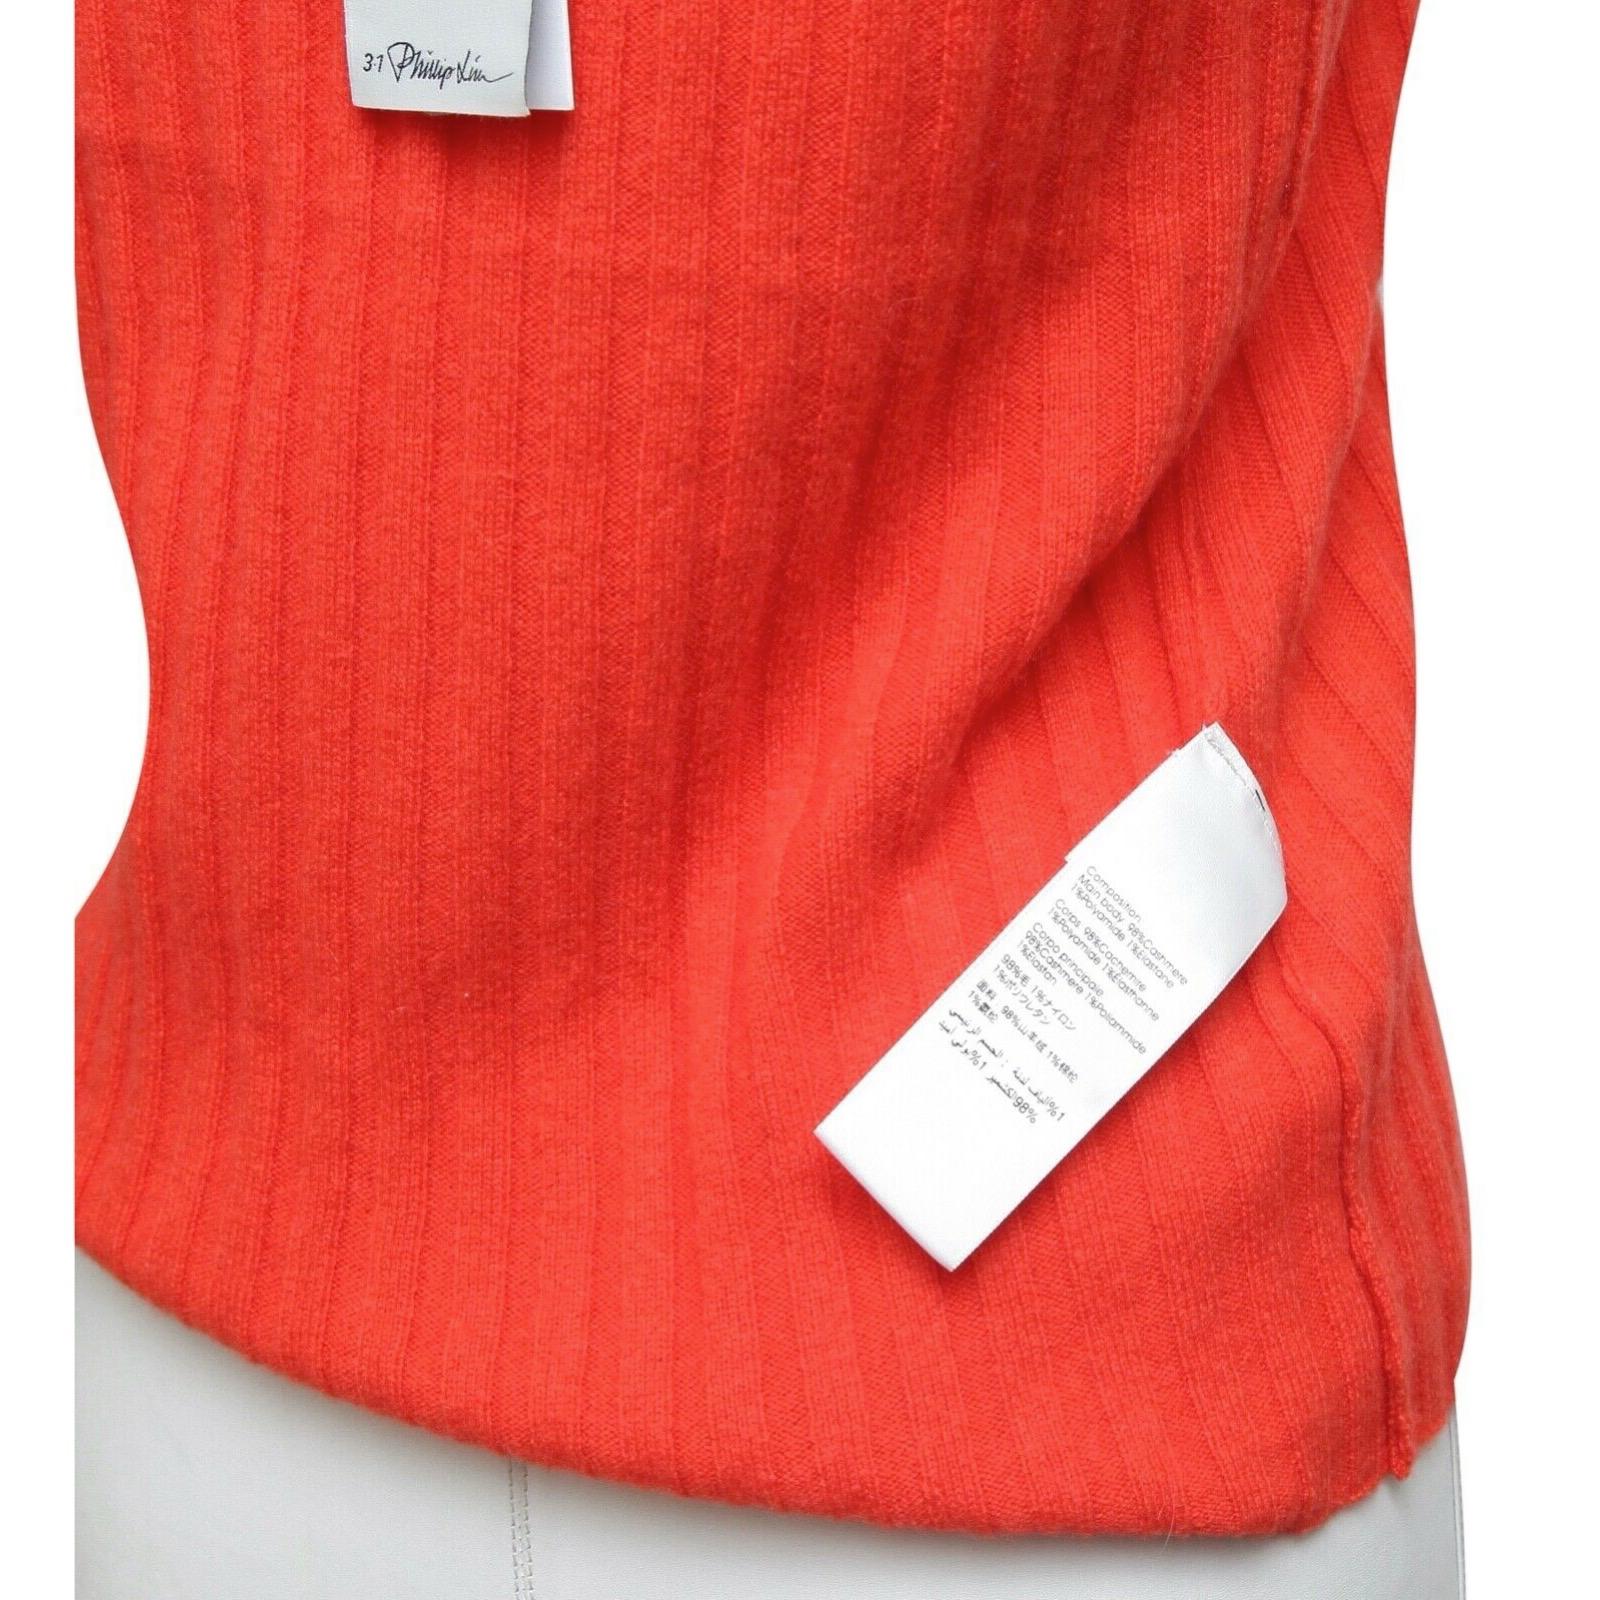 3.1 PHILLIP LIM Orange Sweater Knit Sleeveless Scoop Neck Ribbed Cashmere L NWT For Sale 5